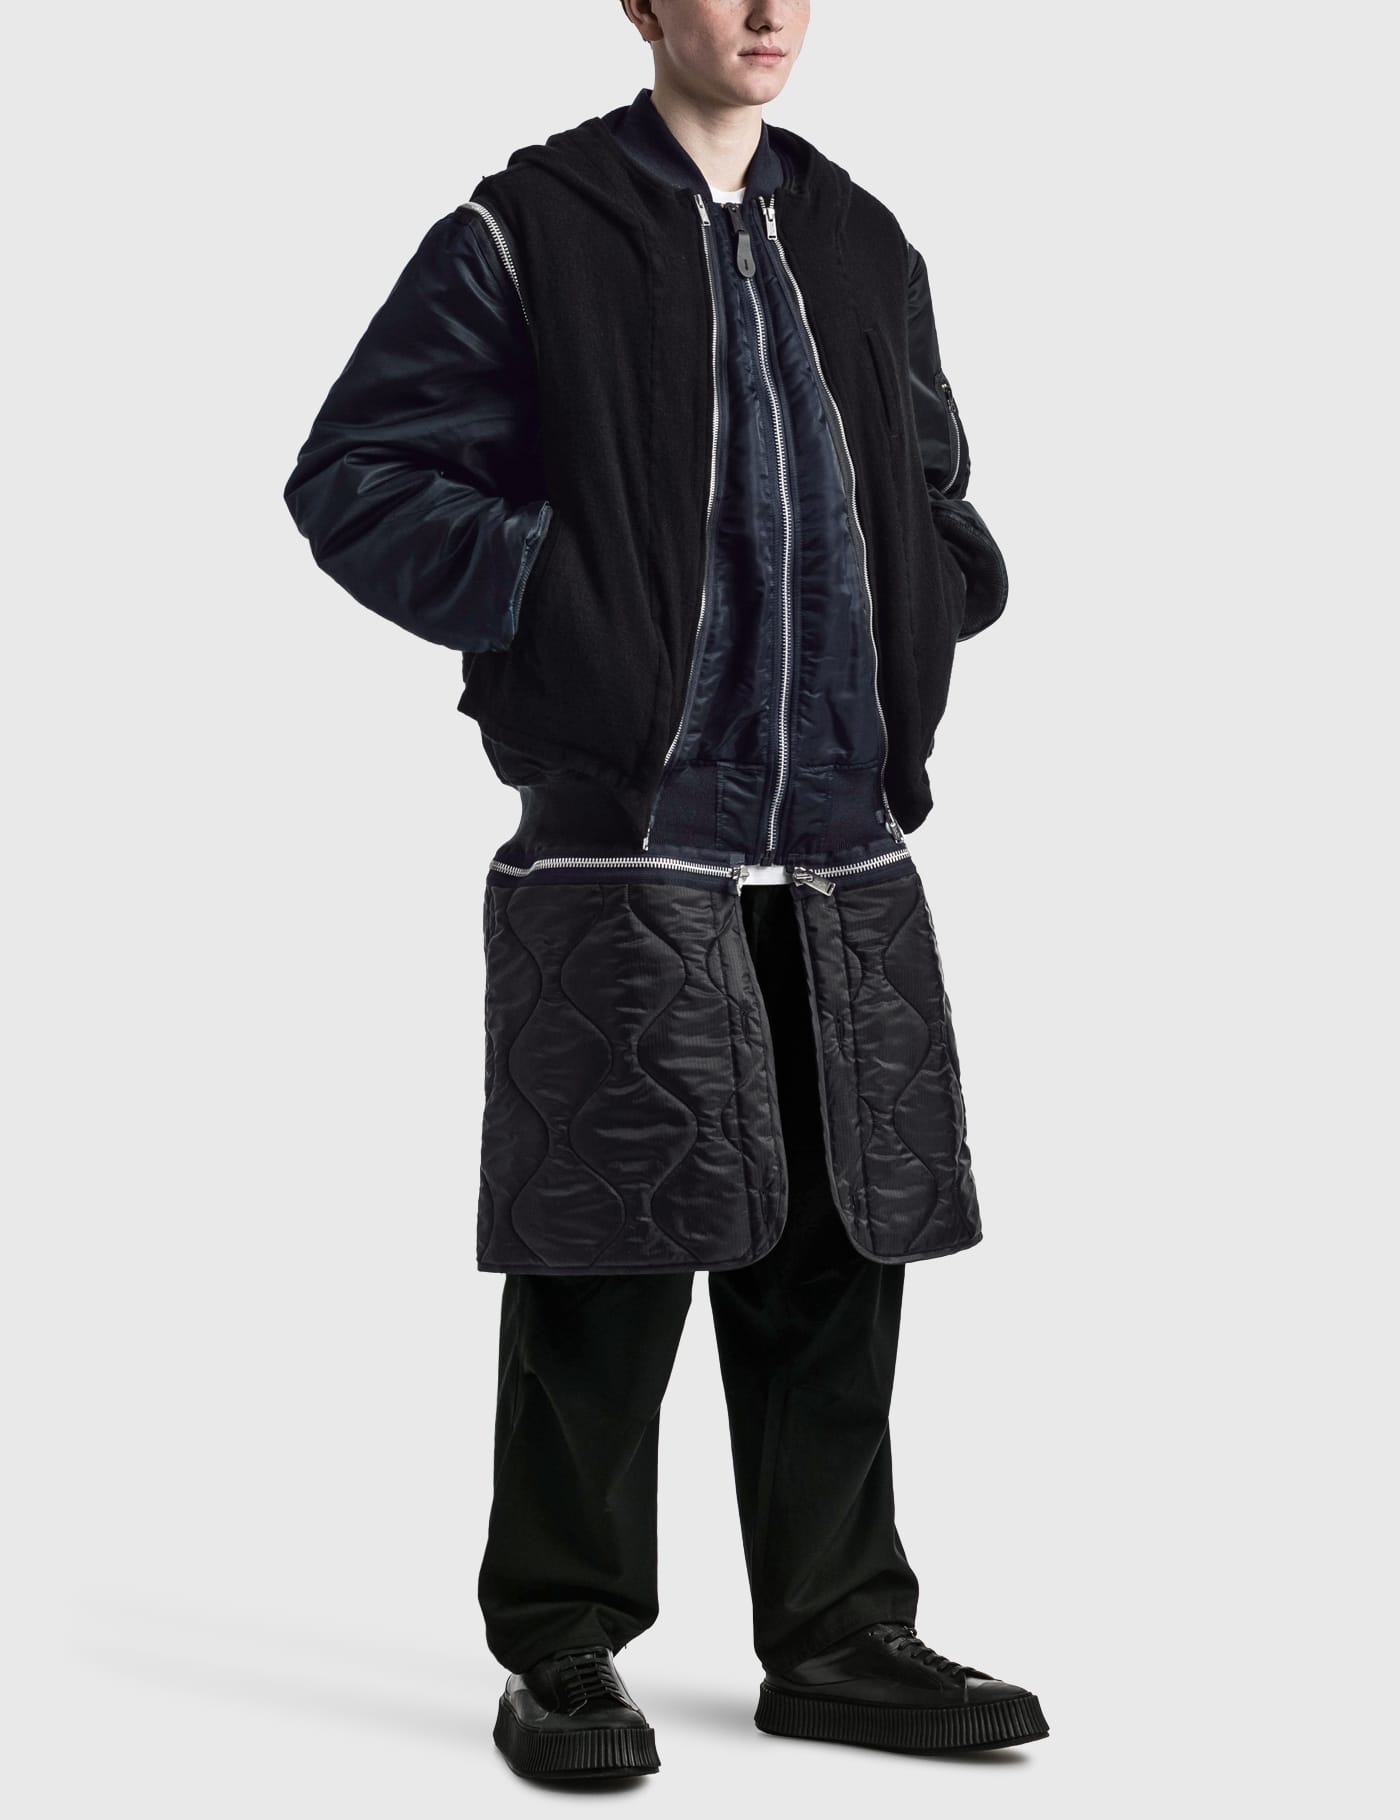 Undercover   Undercover x Alpha Industries Coat   HBX   Globally